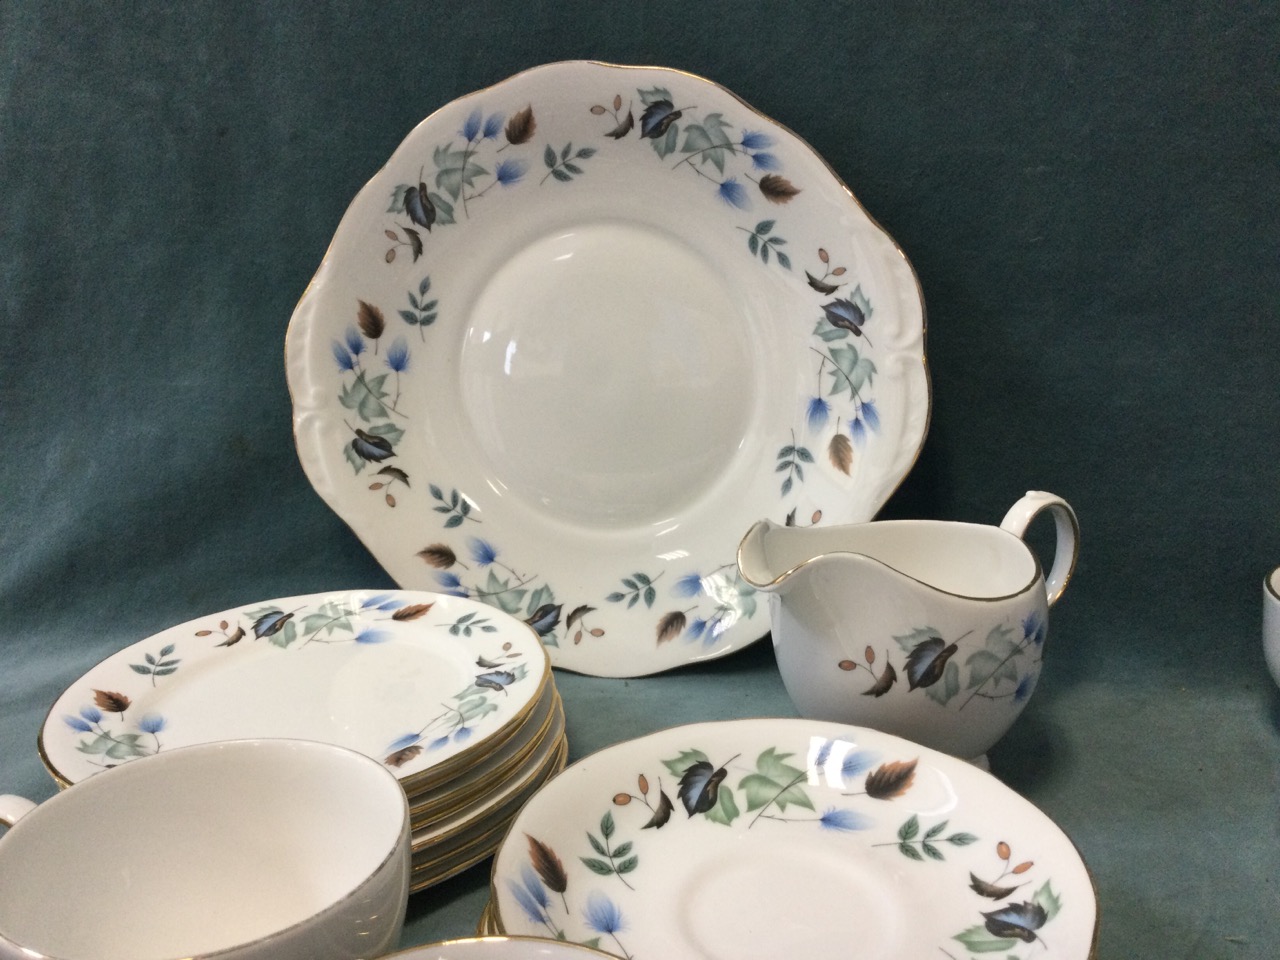 A contemporary Harmony gilt edged white porcelain dinner service with dinner plates, side plates, - Image 3 of 3